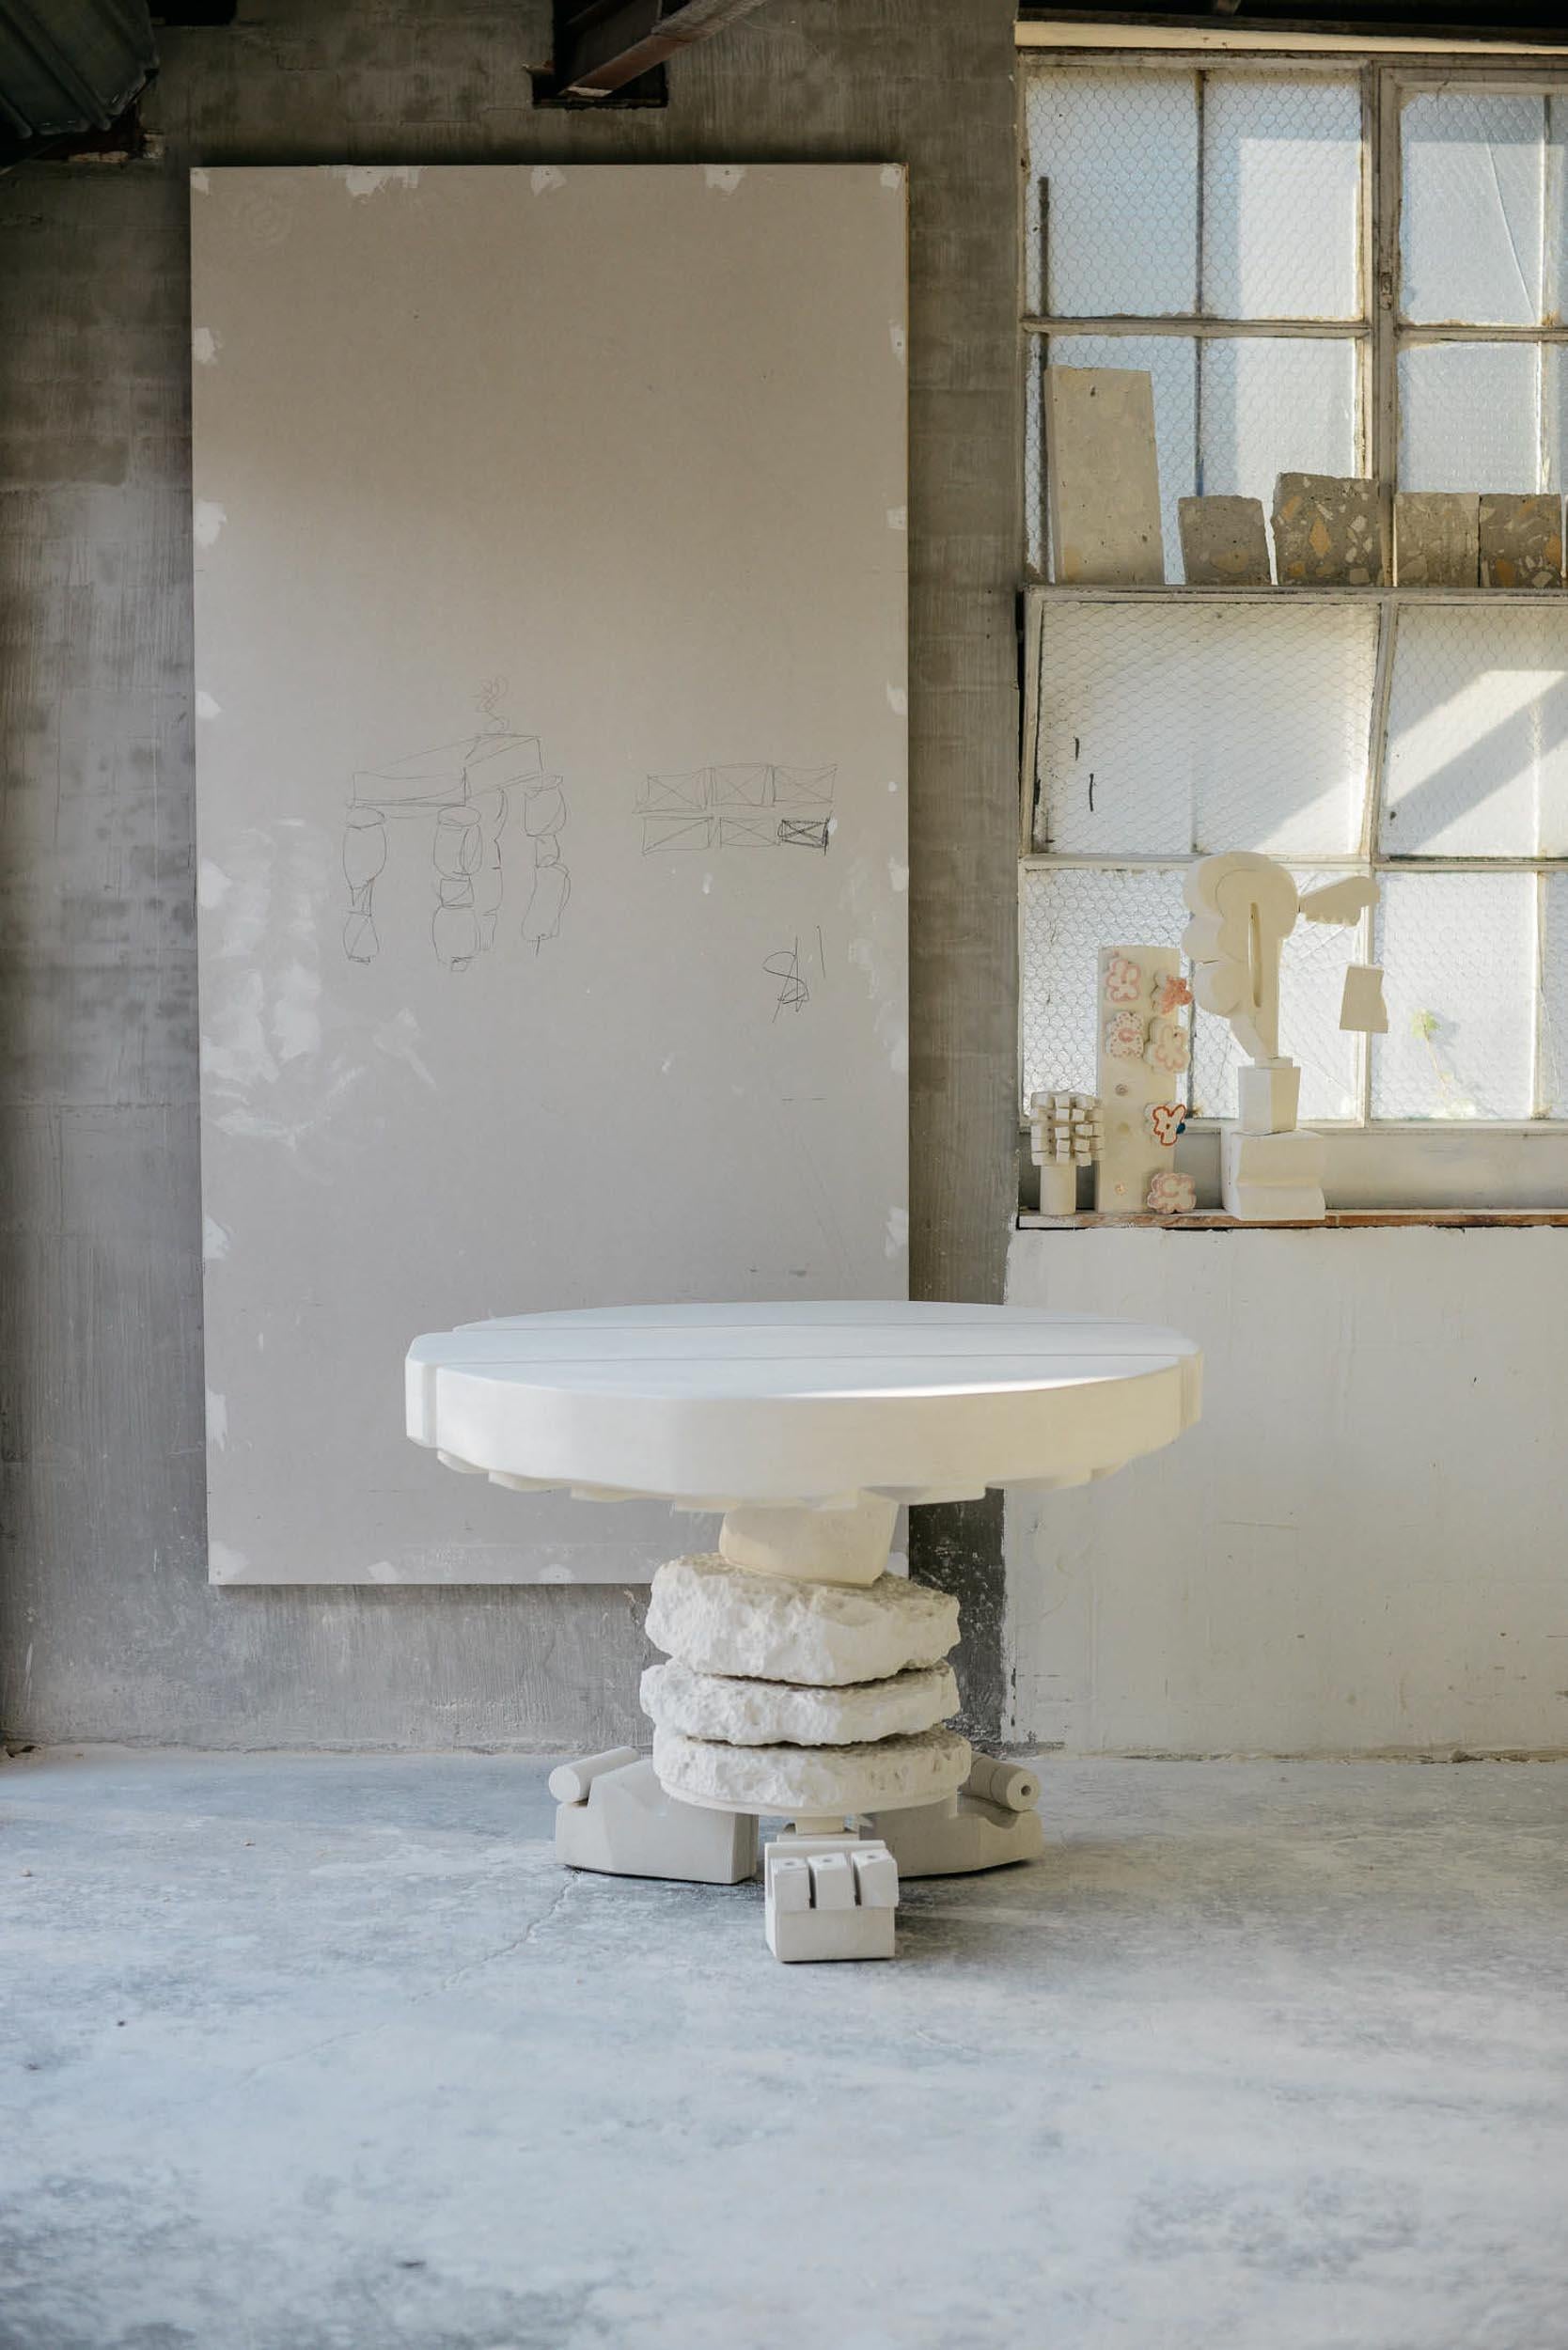 Australian Contemporary Console 'Pure Dead Mental' Made of Limestone, by DenHolm